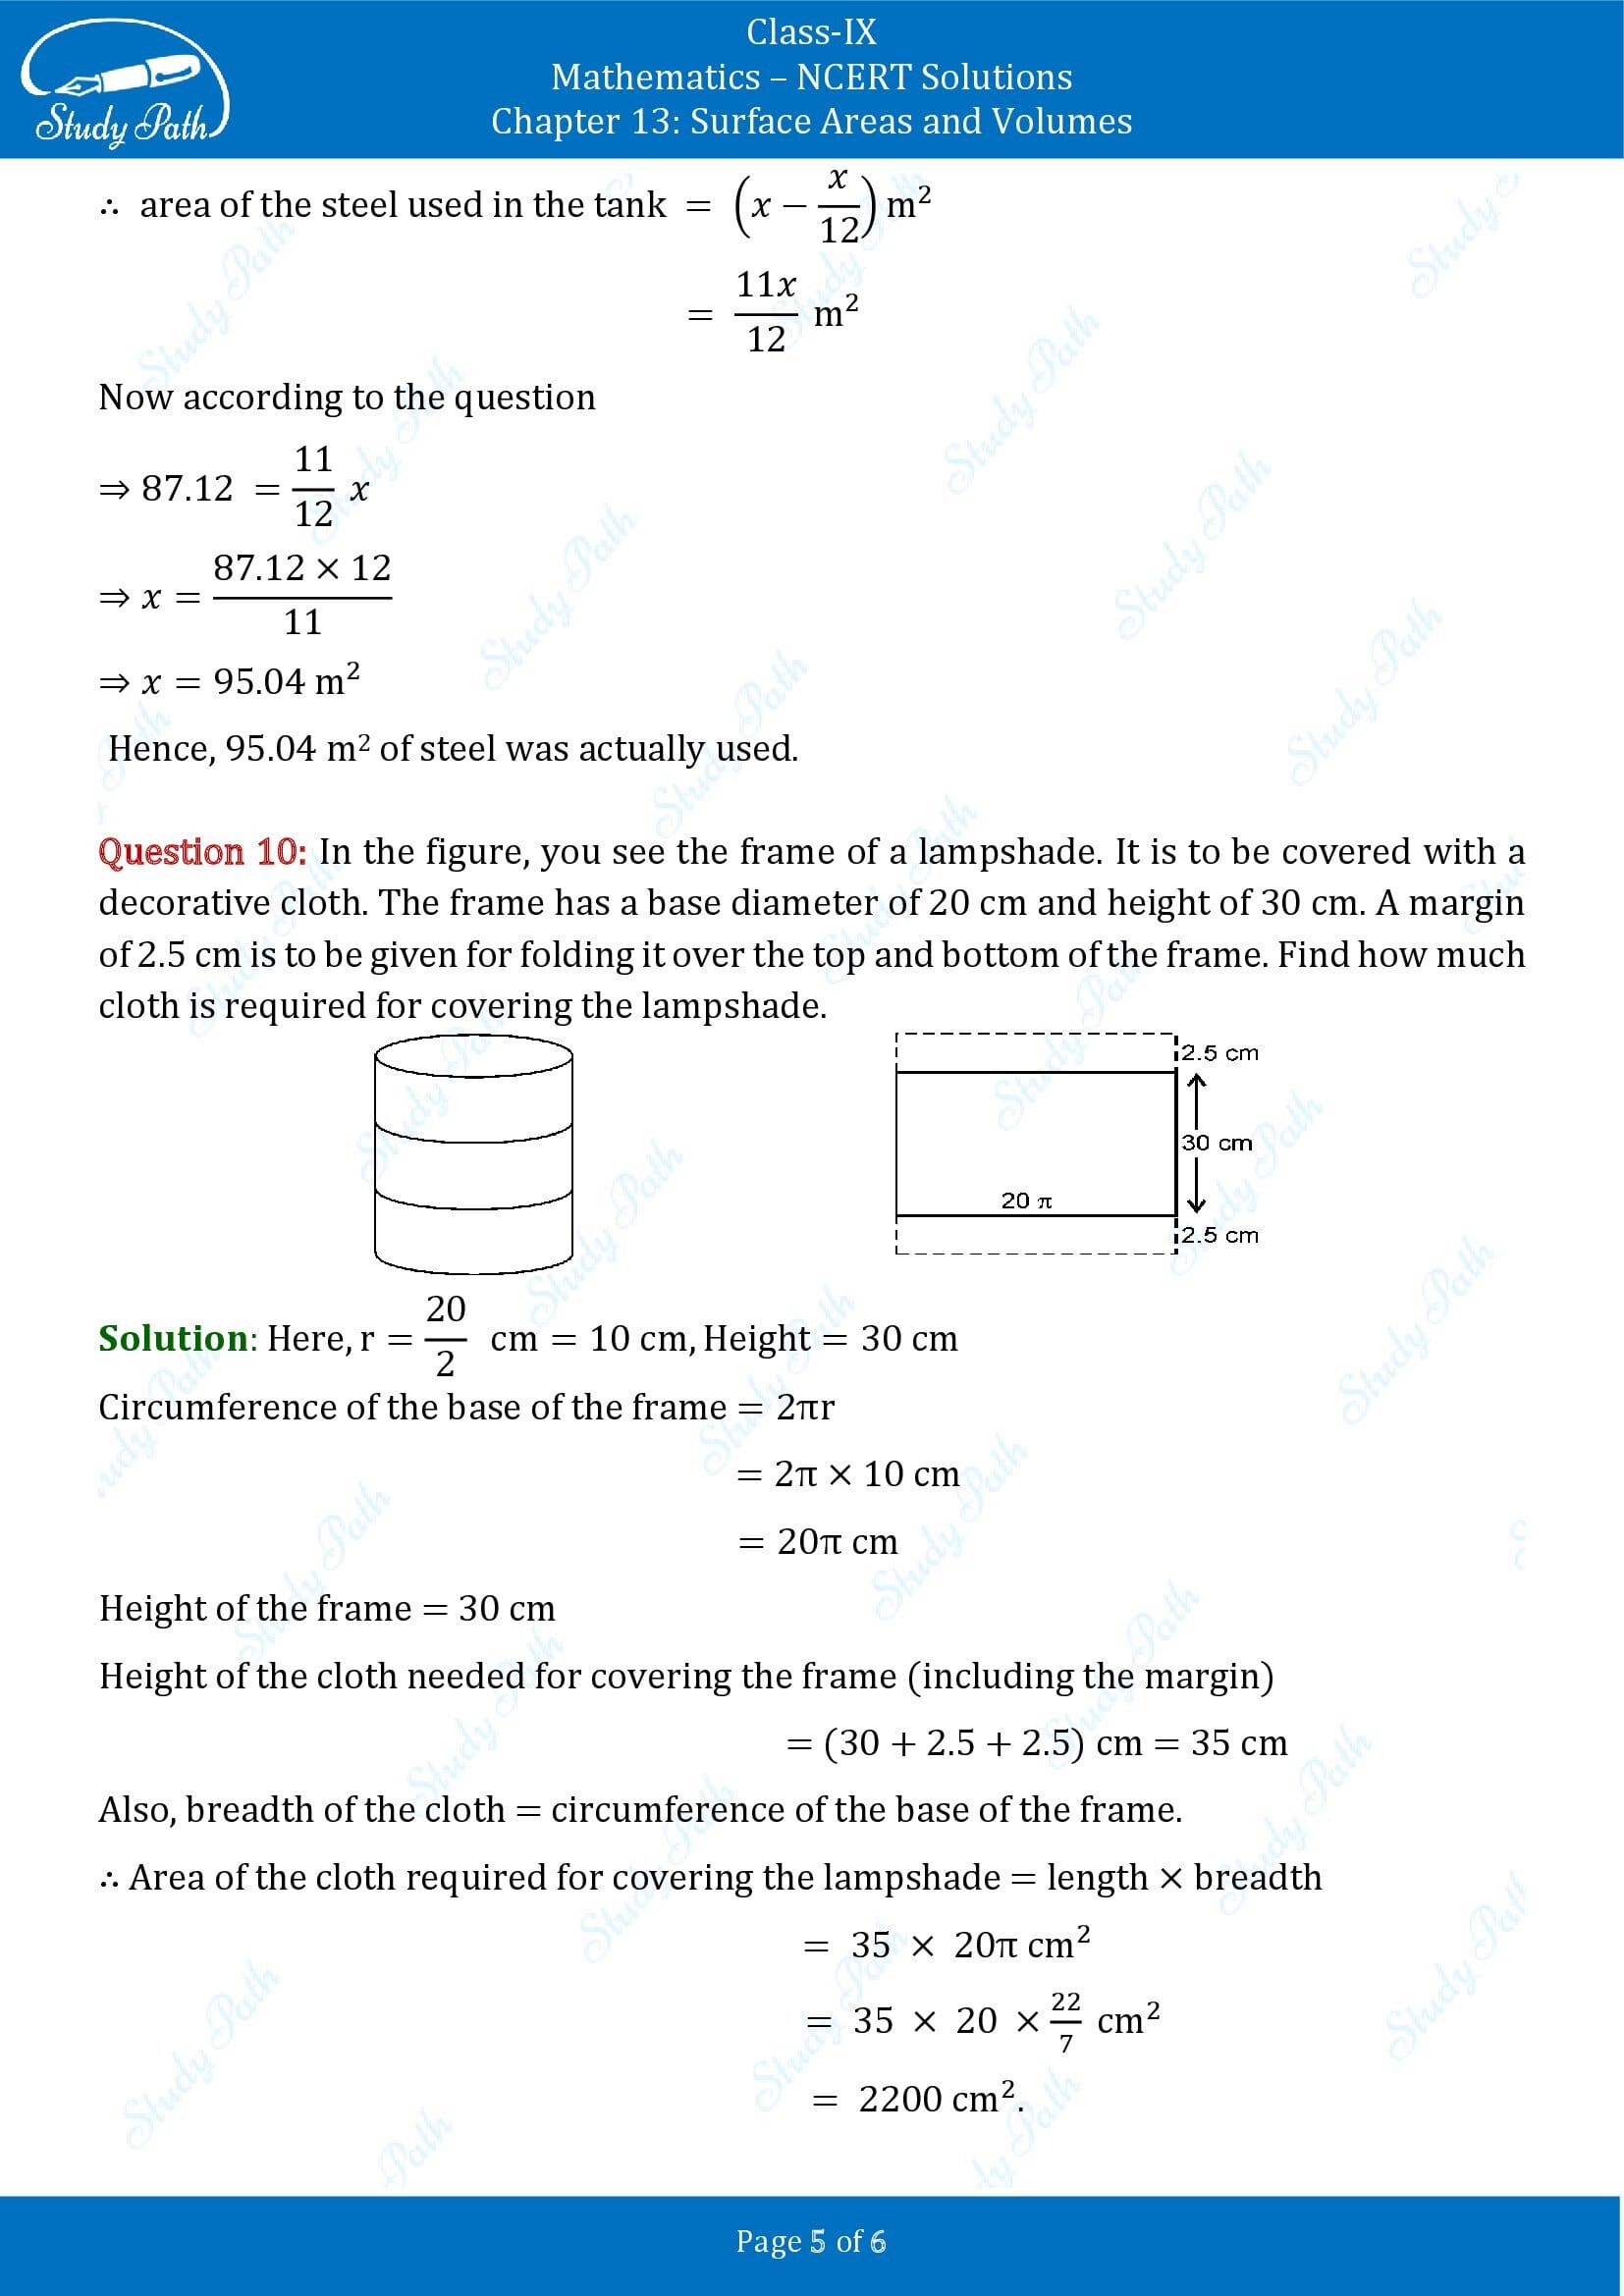 NCERT Solutions for Class 9 Maths Chapter 13 Surface Areas and Volumes Exercise 13.2 00005